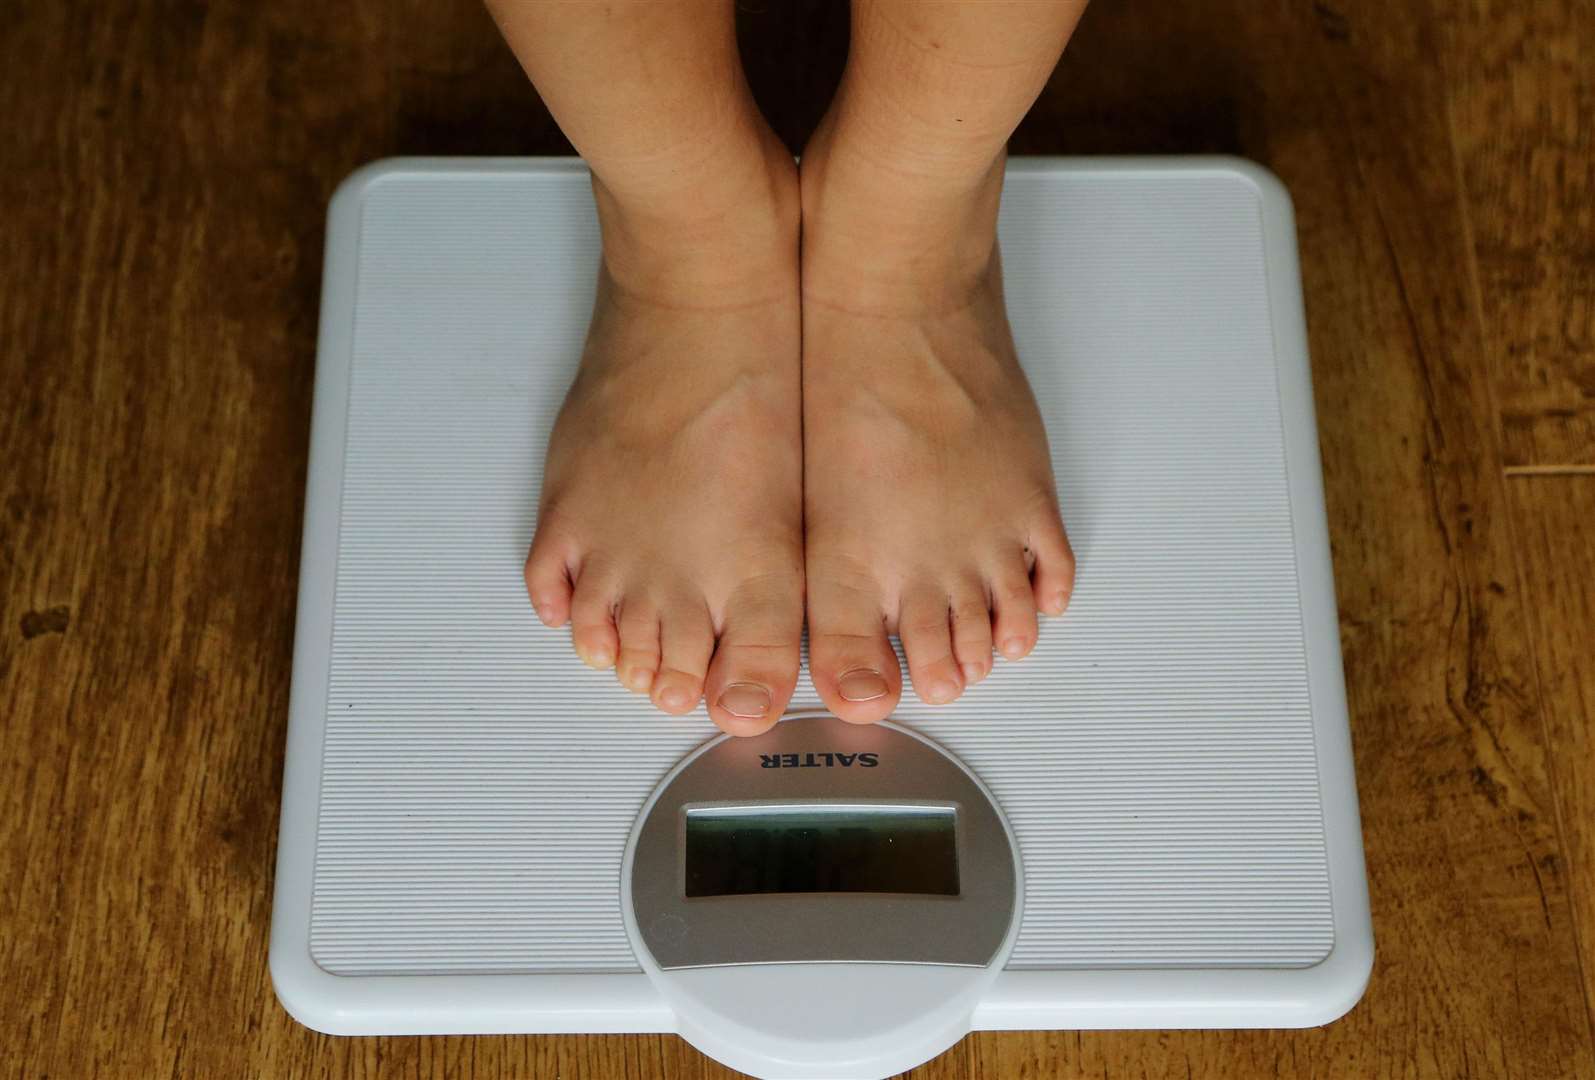 Children are weighed in school as part of the government's National Child Measurement Programme